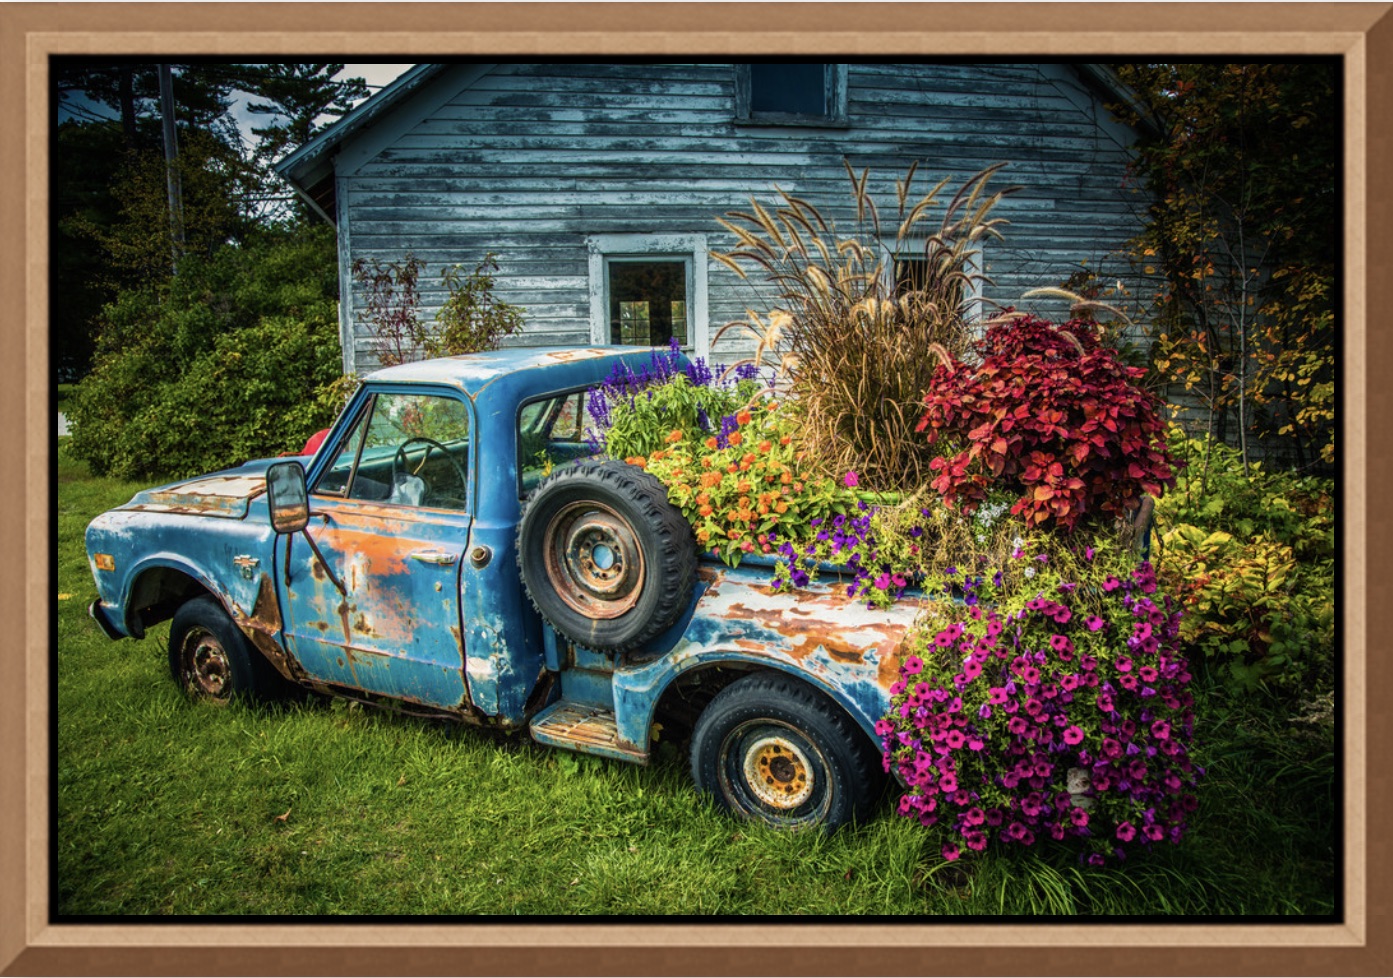 Mike Caplan "Flower Bed" Photography